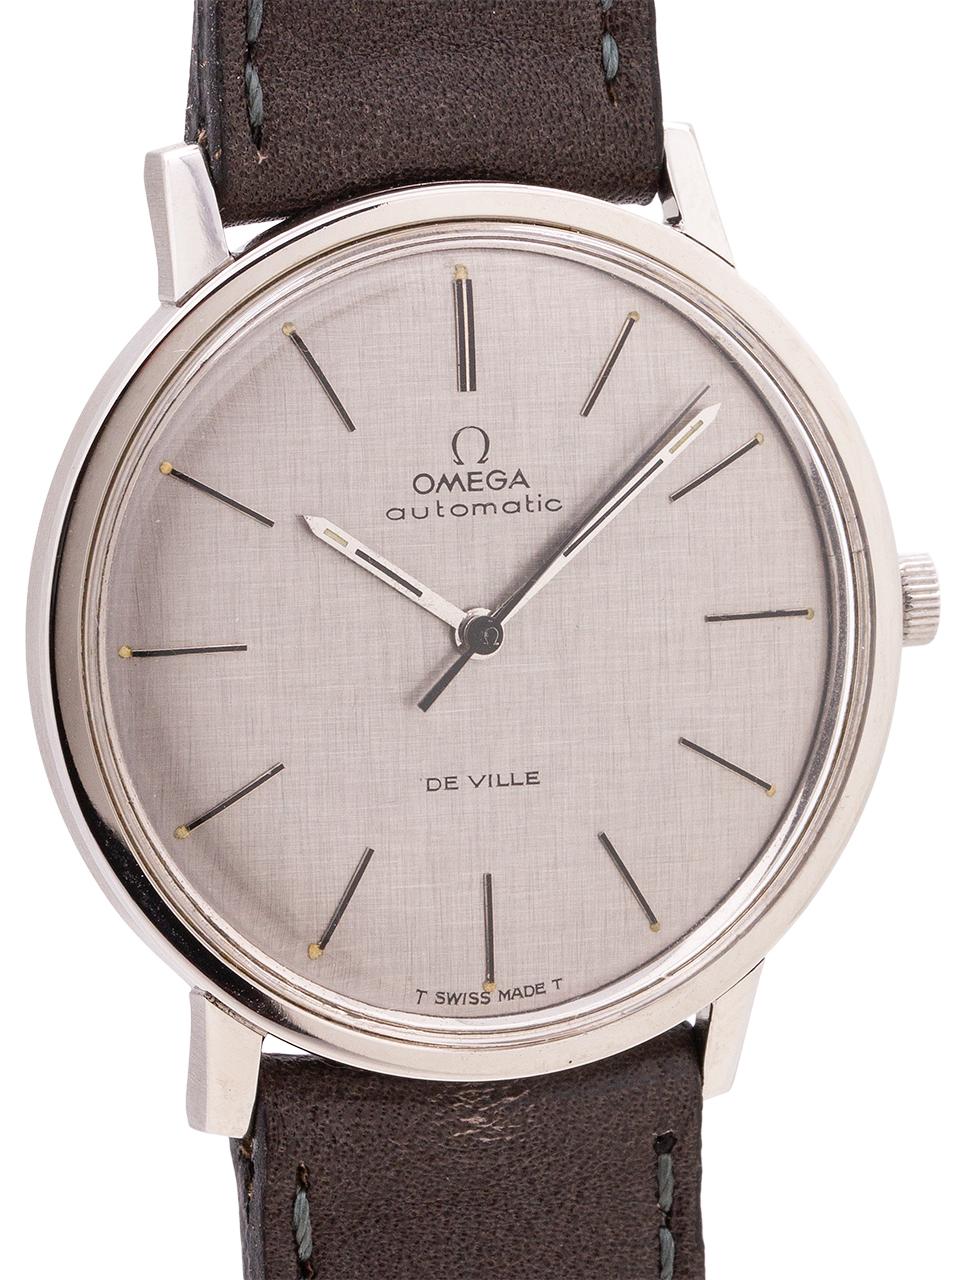 
Very dressy mid century design vintage man’s Omega stainless steel De Ville ref # 165.008 circa 1968. Featuring a sleek and slim 35 x 38mm case with screw down case back, acrylic crystal, and original finely linen textured matte silver dial with